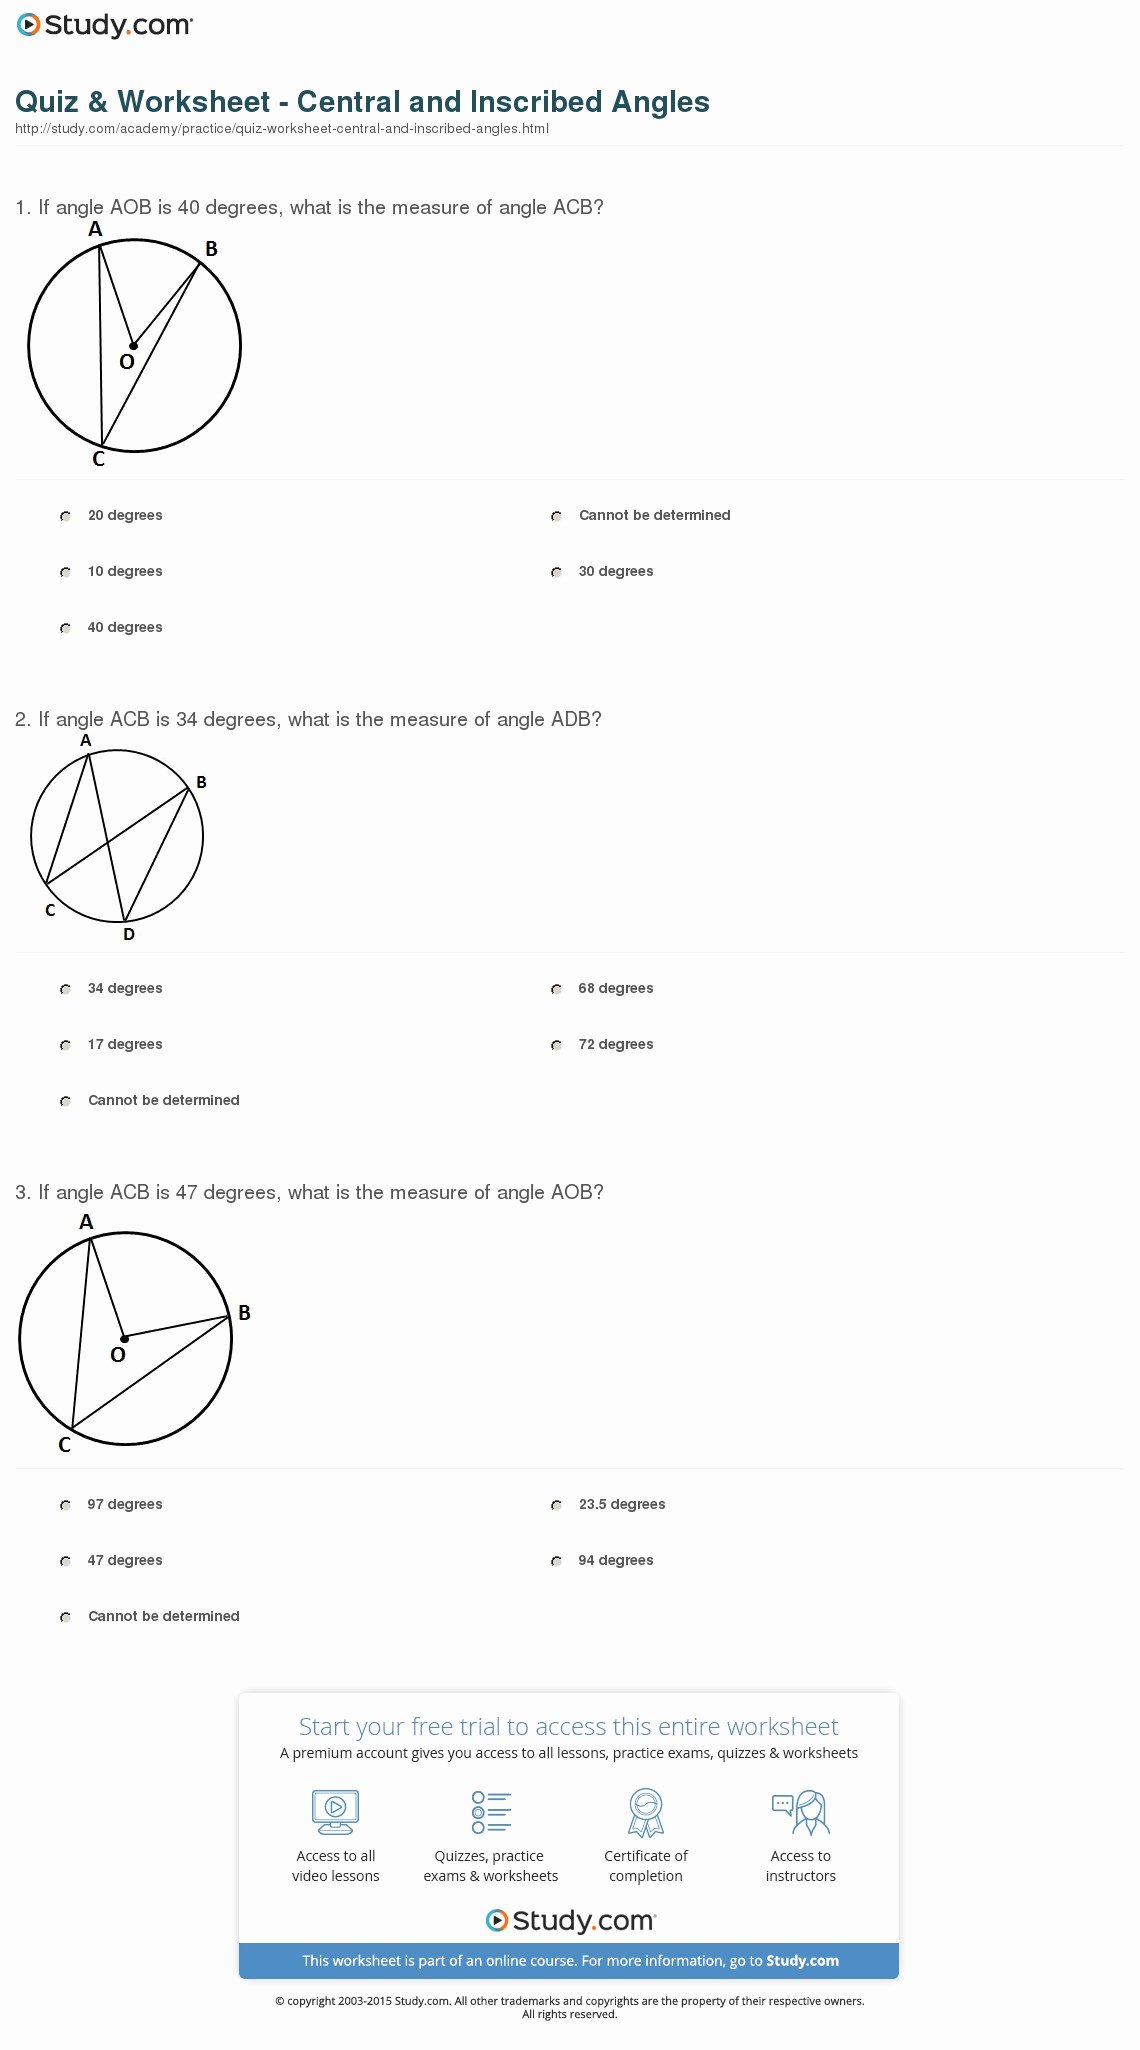 Central and Inscribed Angle Worksheet Lovely Quiz &amp; Worksheet Central and Inscribed Angles